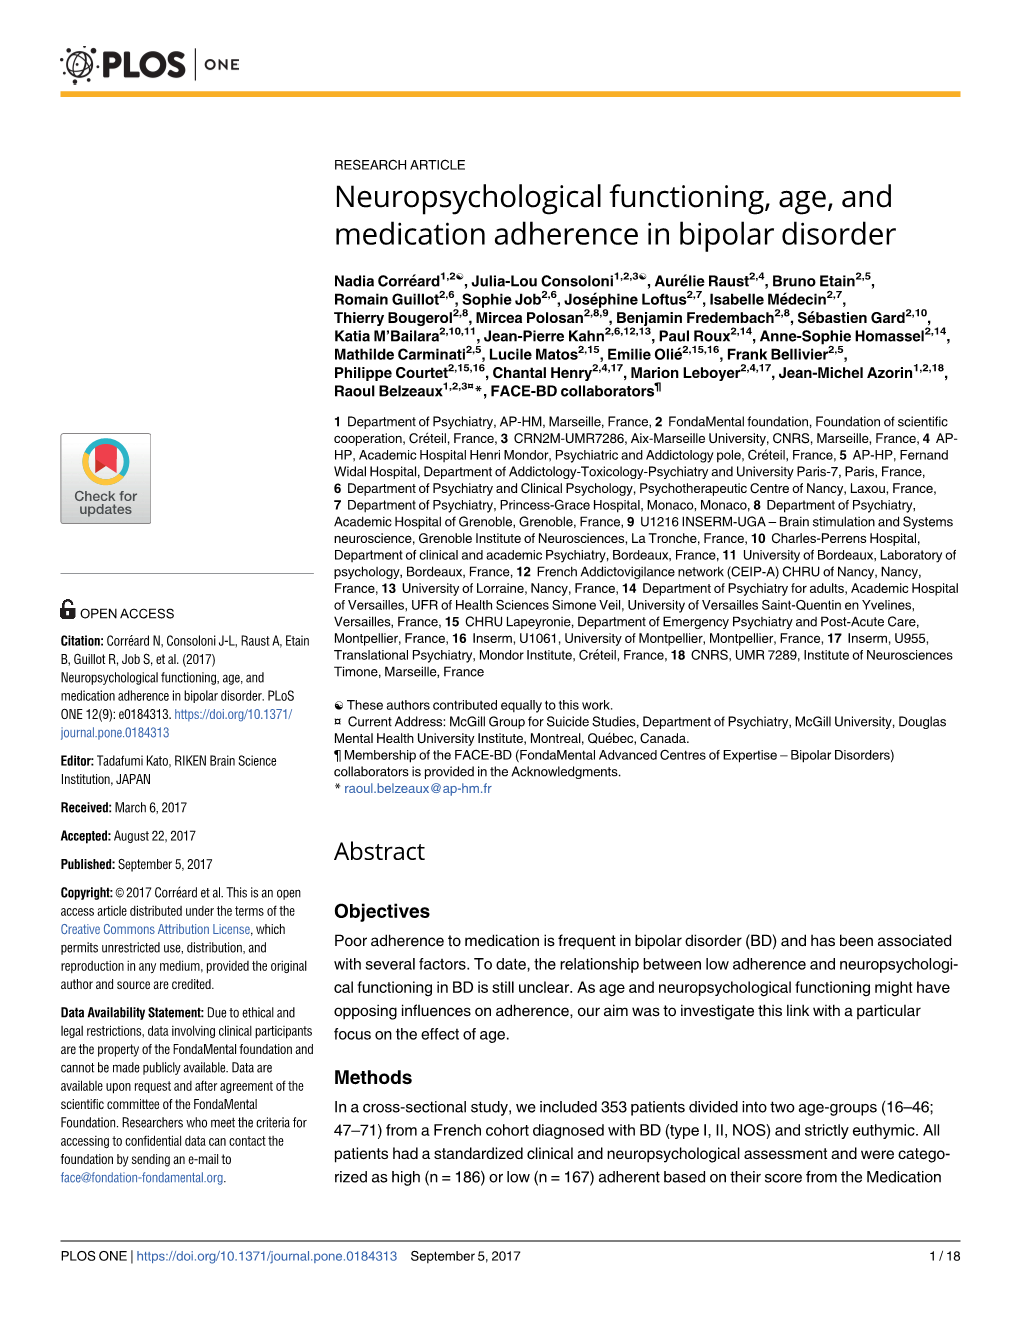 Neuropsychological Functioning, Age, and Medication Adherence in Bipolar Disorder